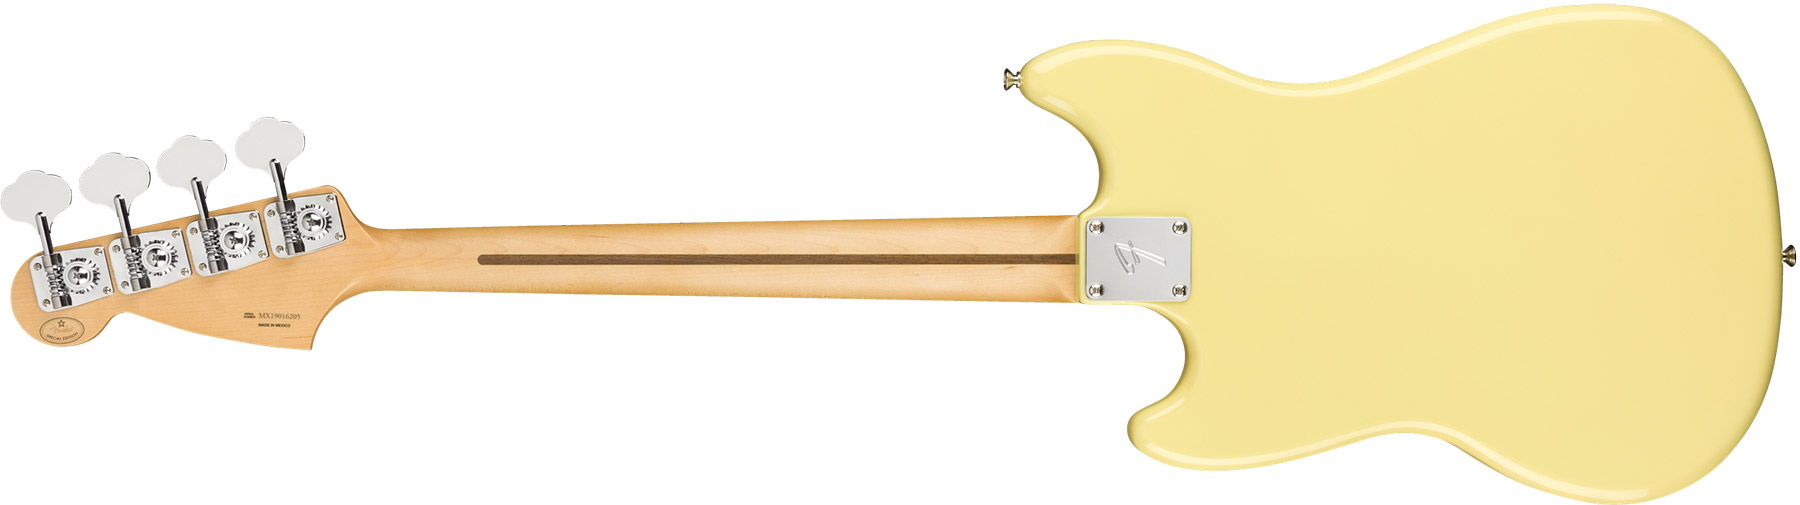 Fender Player Mustang Bass Pj Ltd Mex Mn - Canary - Basse Électrique Solid Body - Variation 1